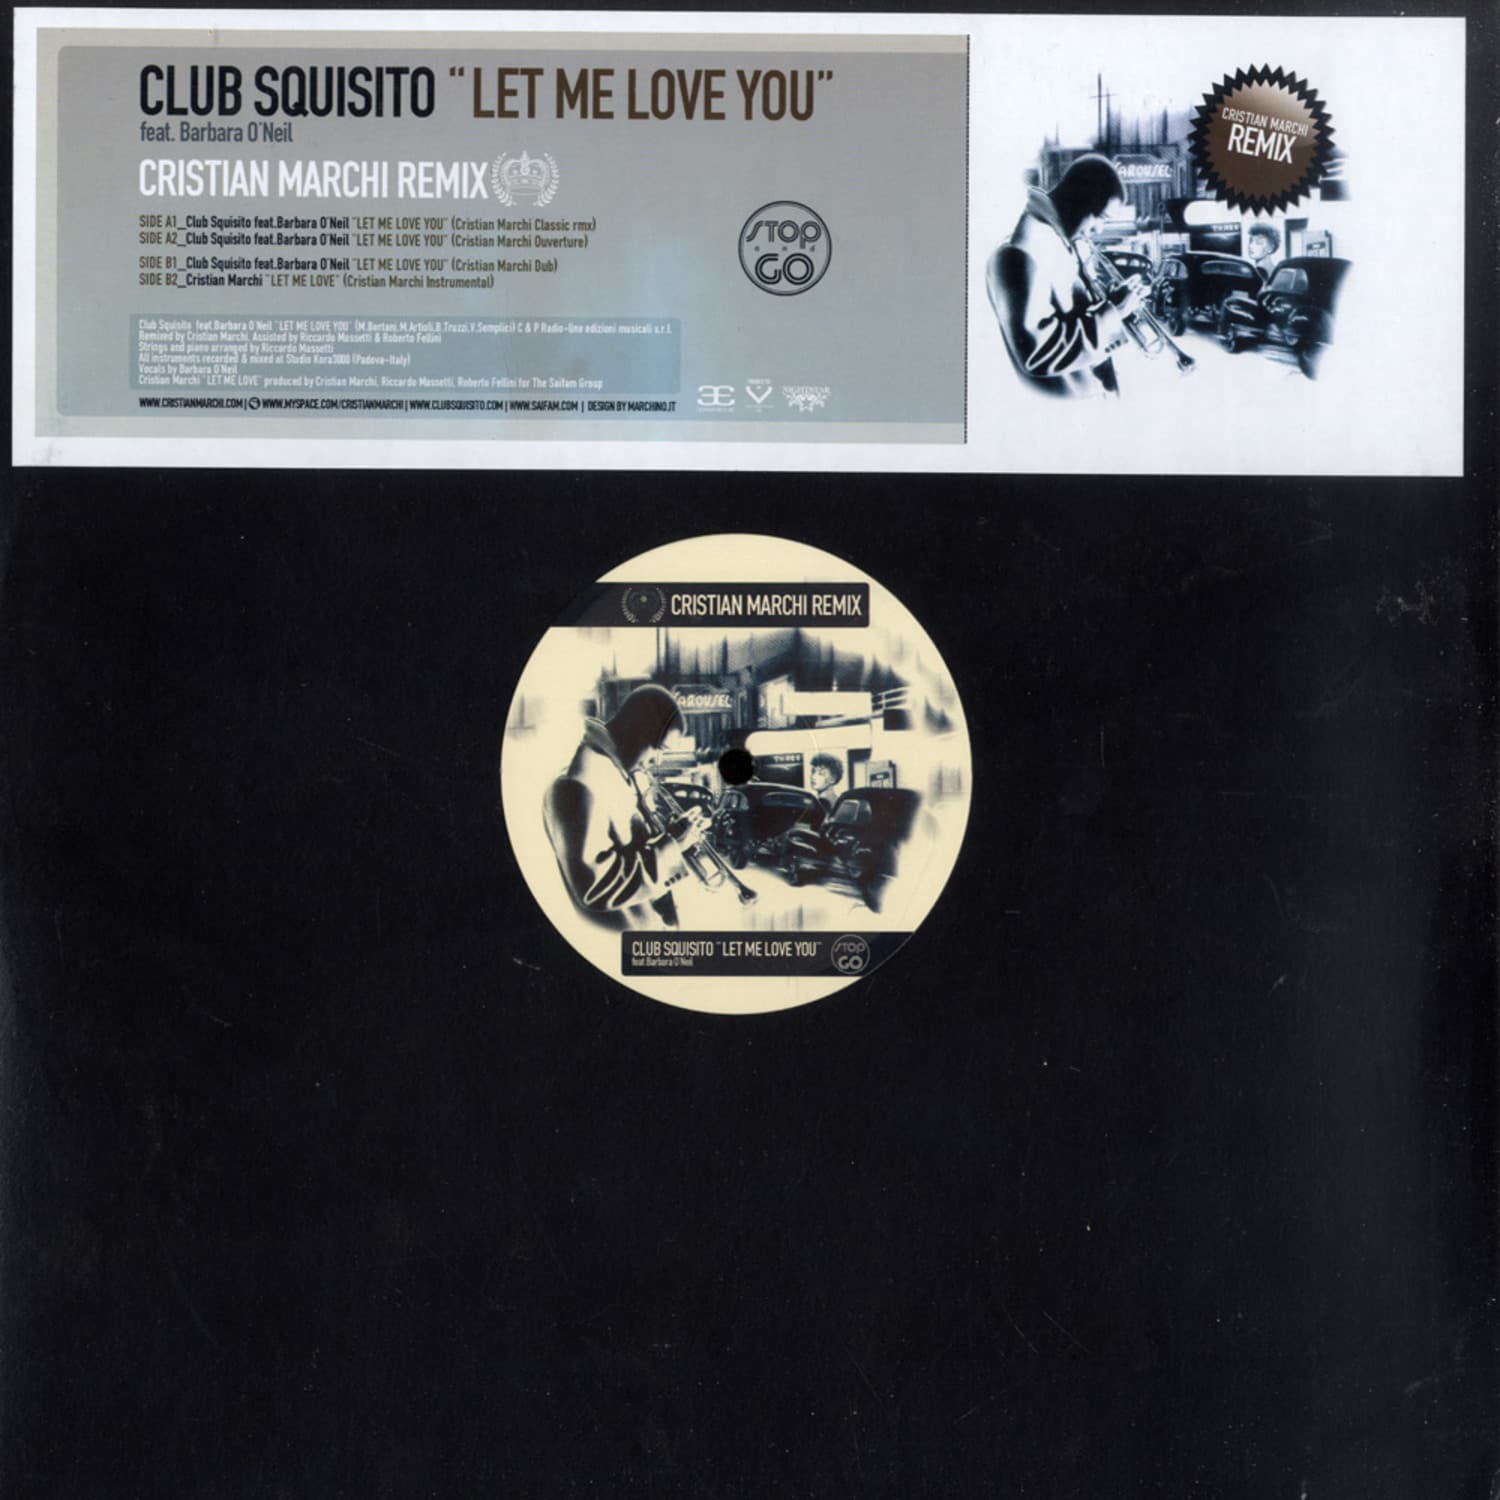 Club Squisito feat. Barbara O Neil - LET ME LOVE YOU